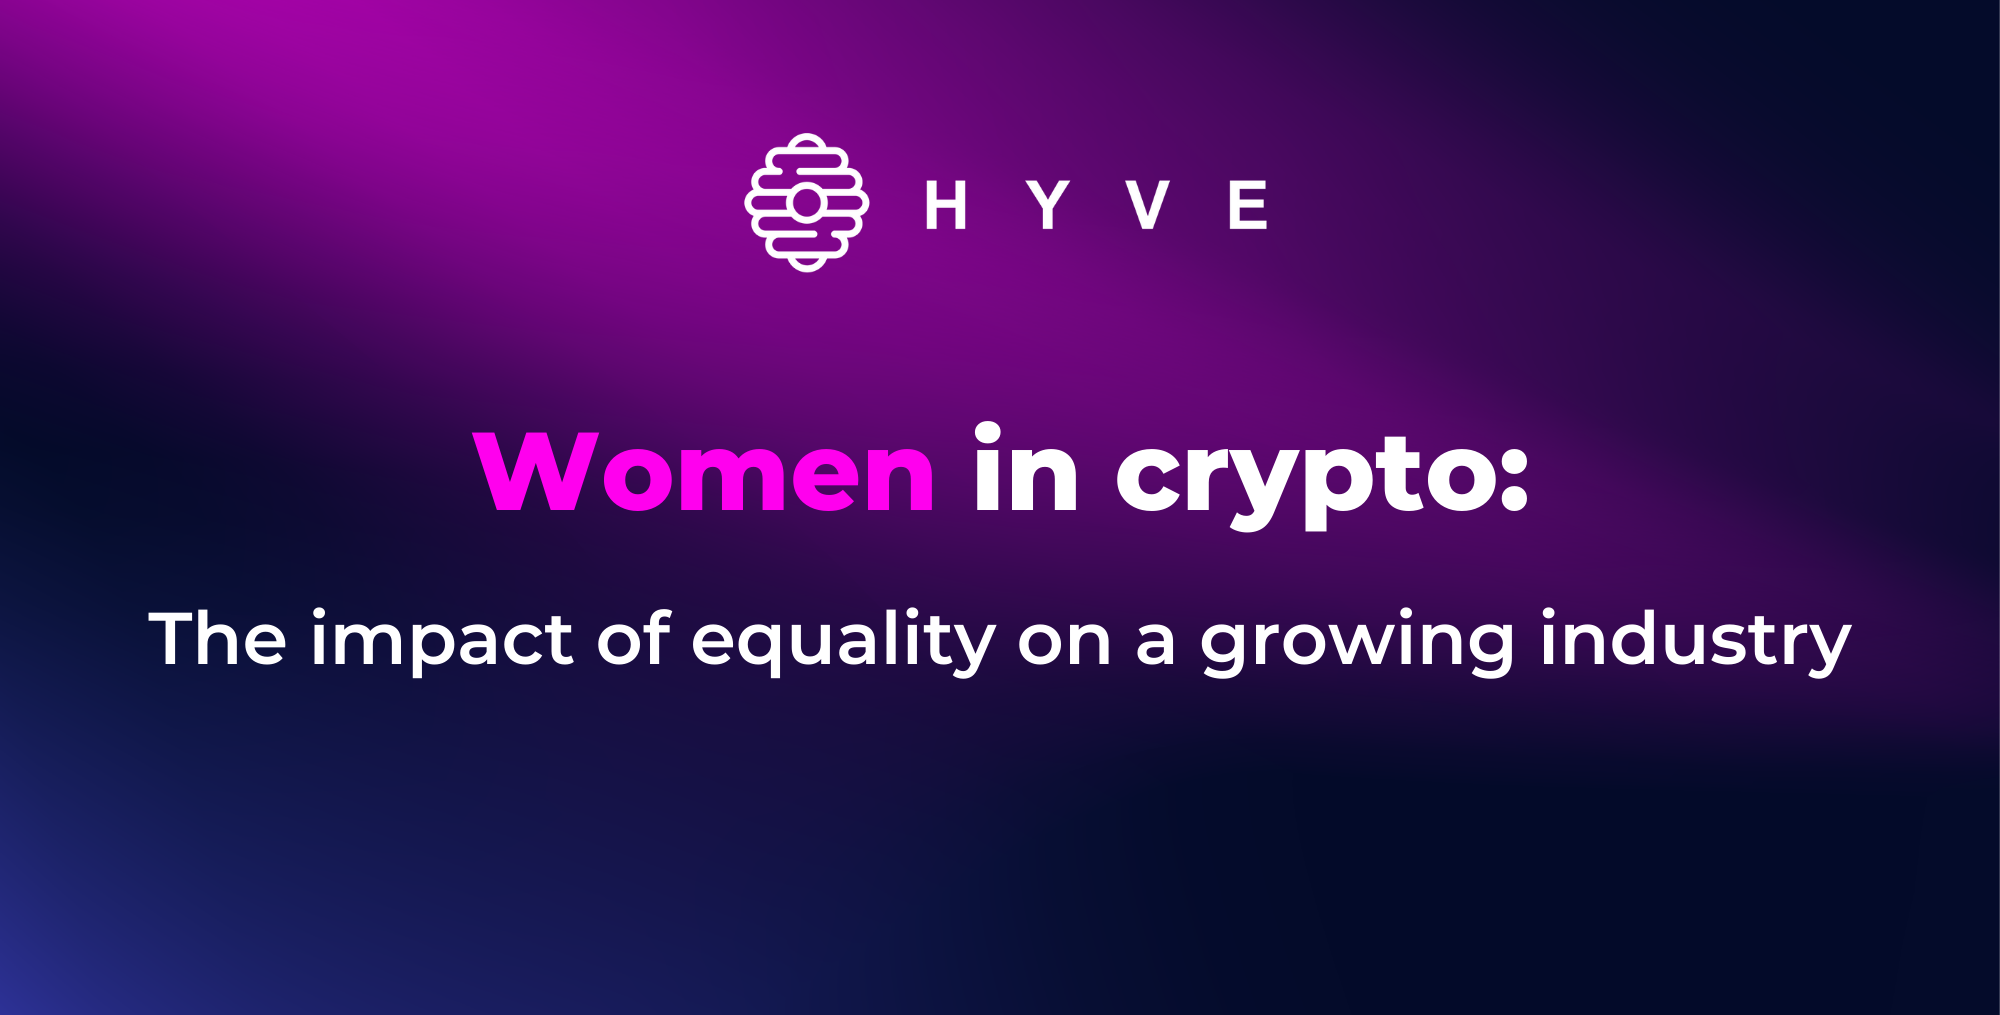 Women in Crypto: The impact of equality on a growing industry